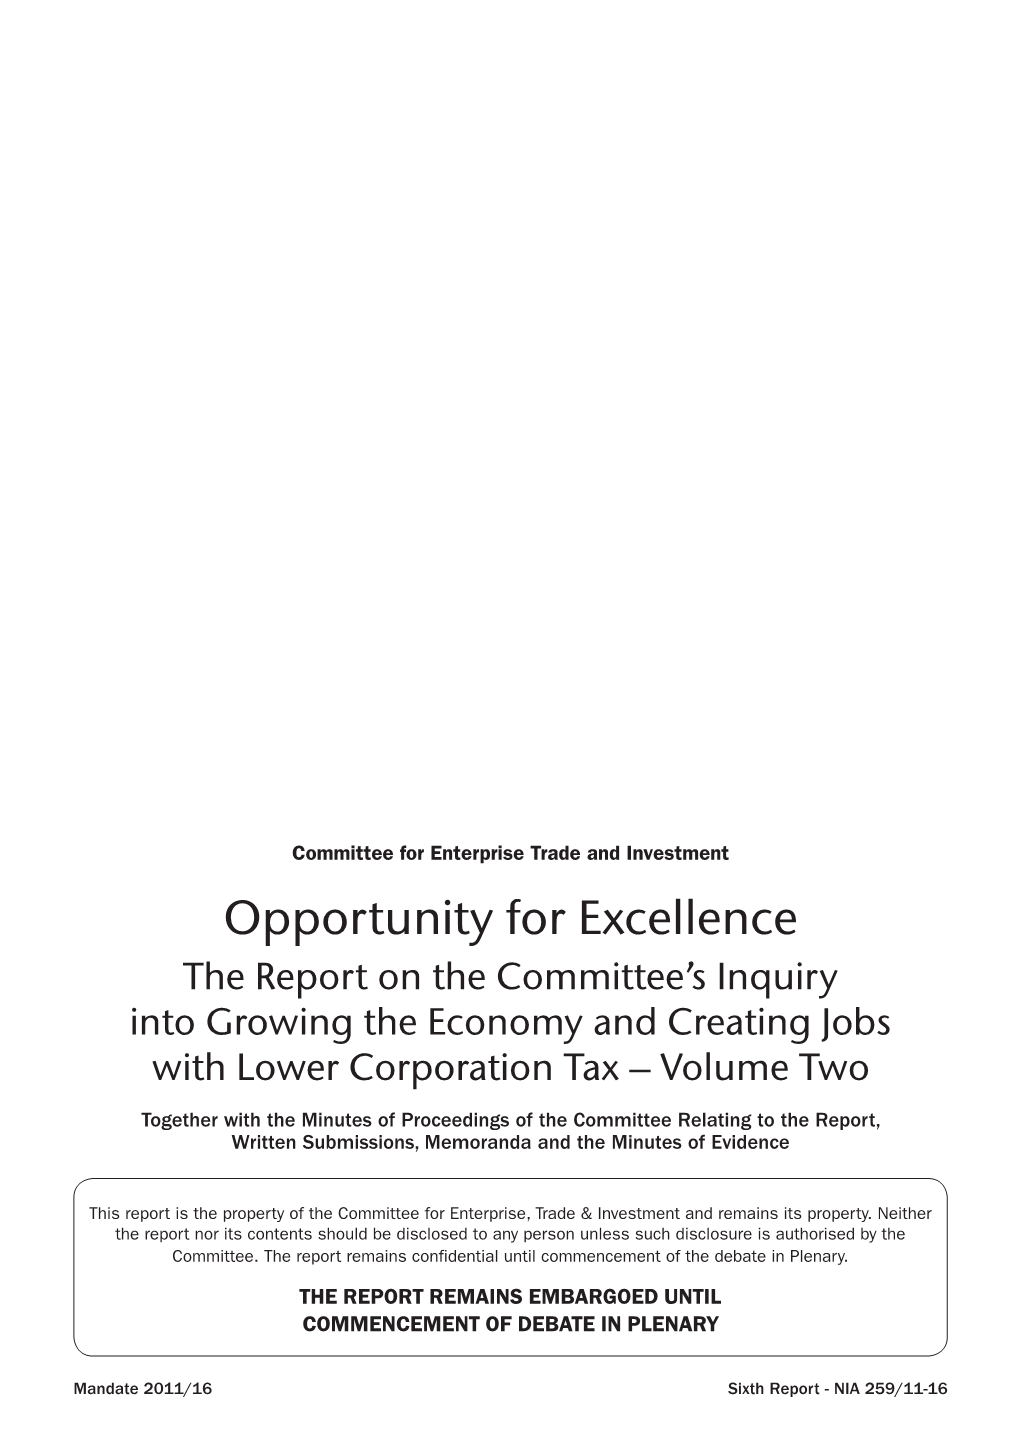 Opportunity for Excellence the Report on the Committee’S Inquiry Into Growing the Economy and Creating Jobs with Lower Corporation Tax – Volume Two